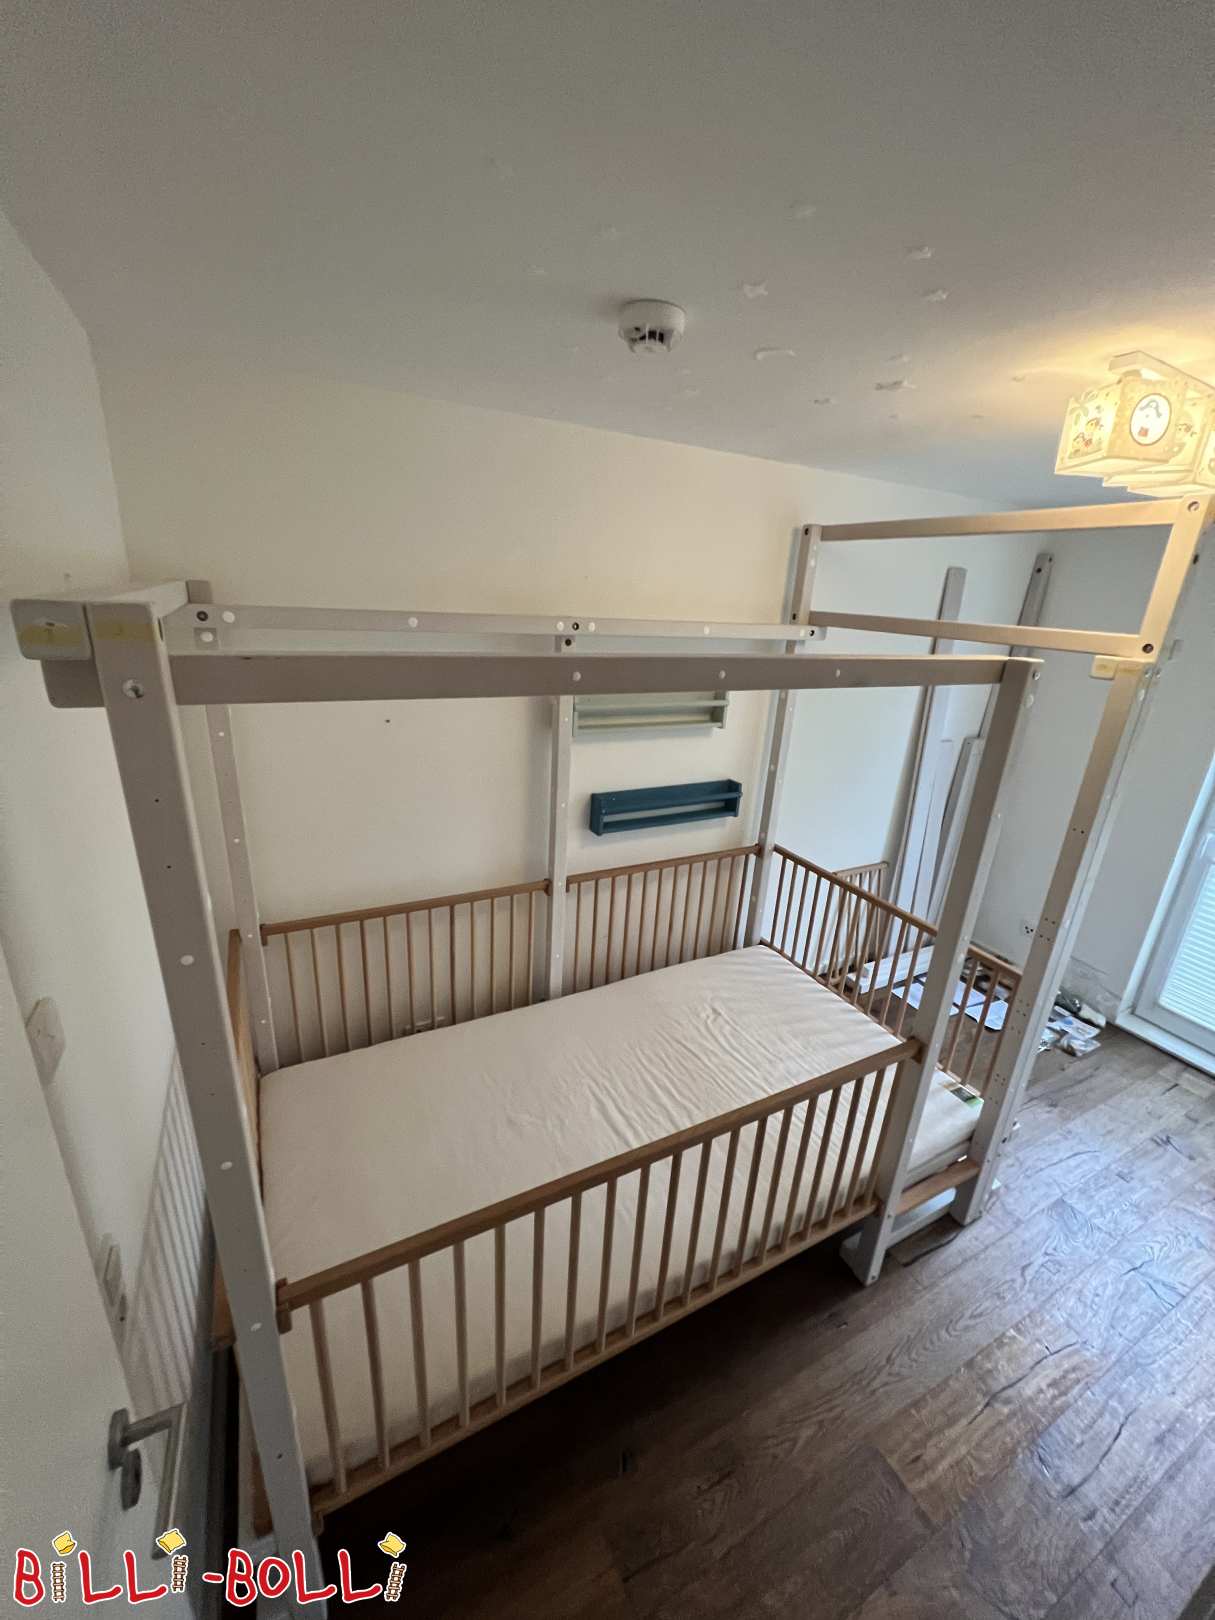 Loft bed 120x220cm, white glazed beech, with baby gate (Category: Accessories/extension parts pre-owned)